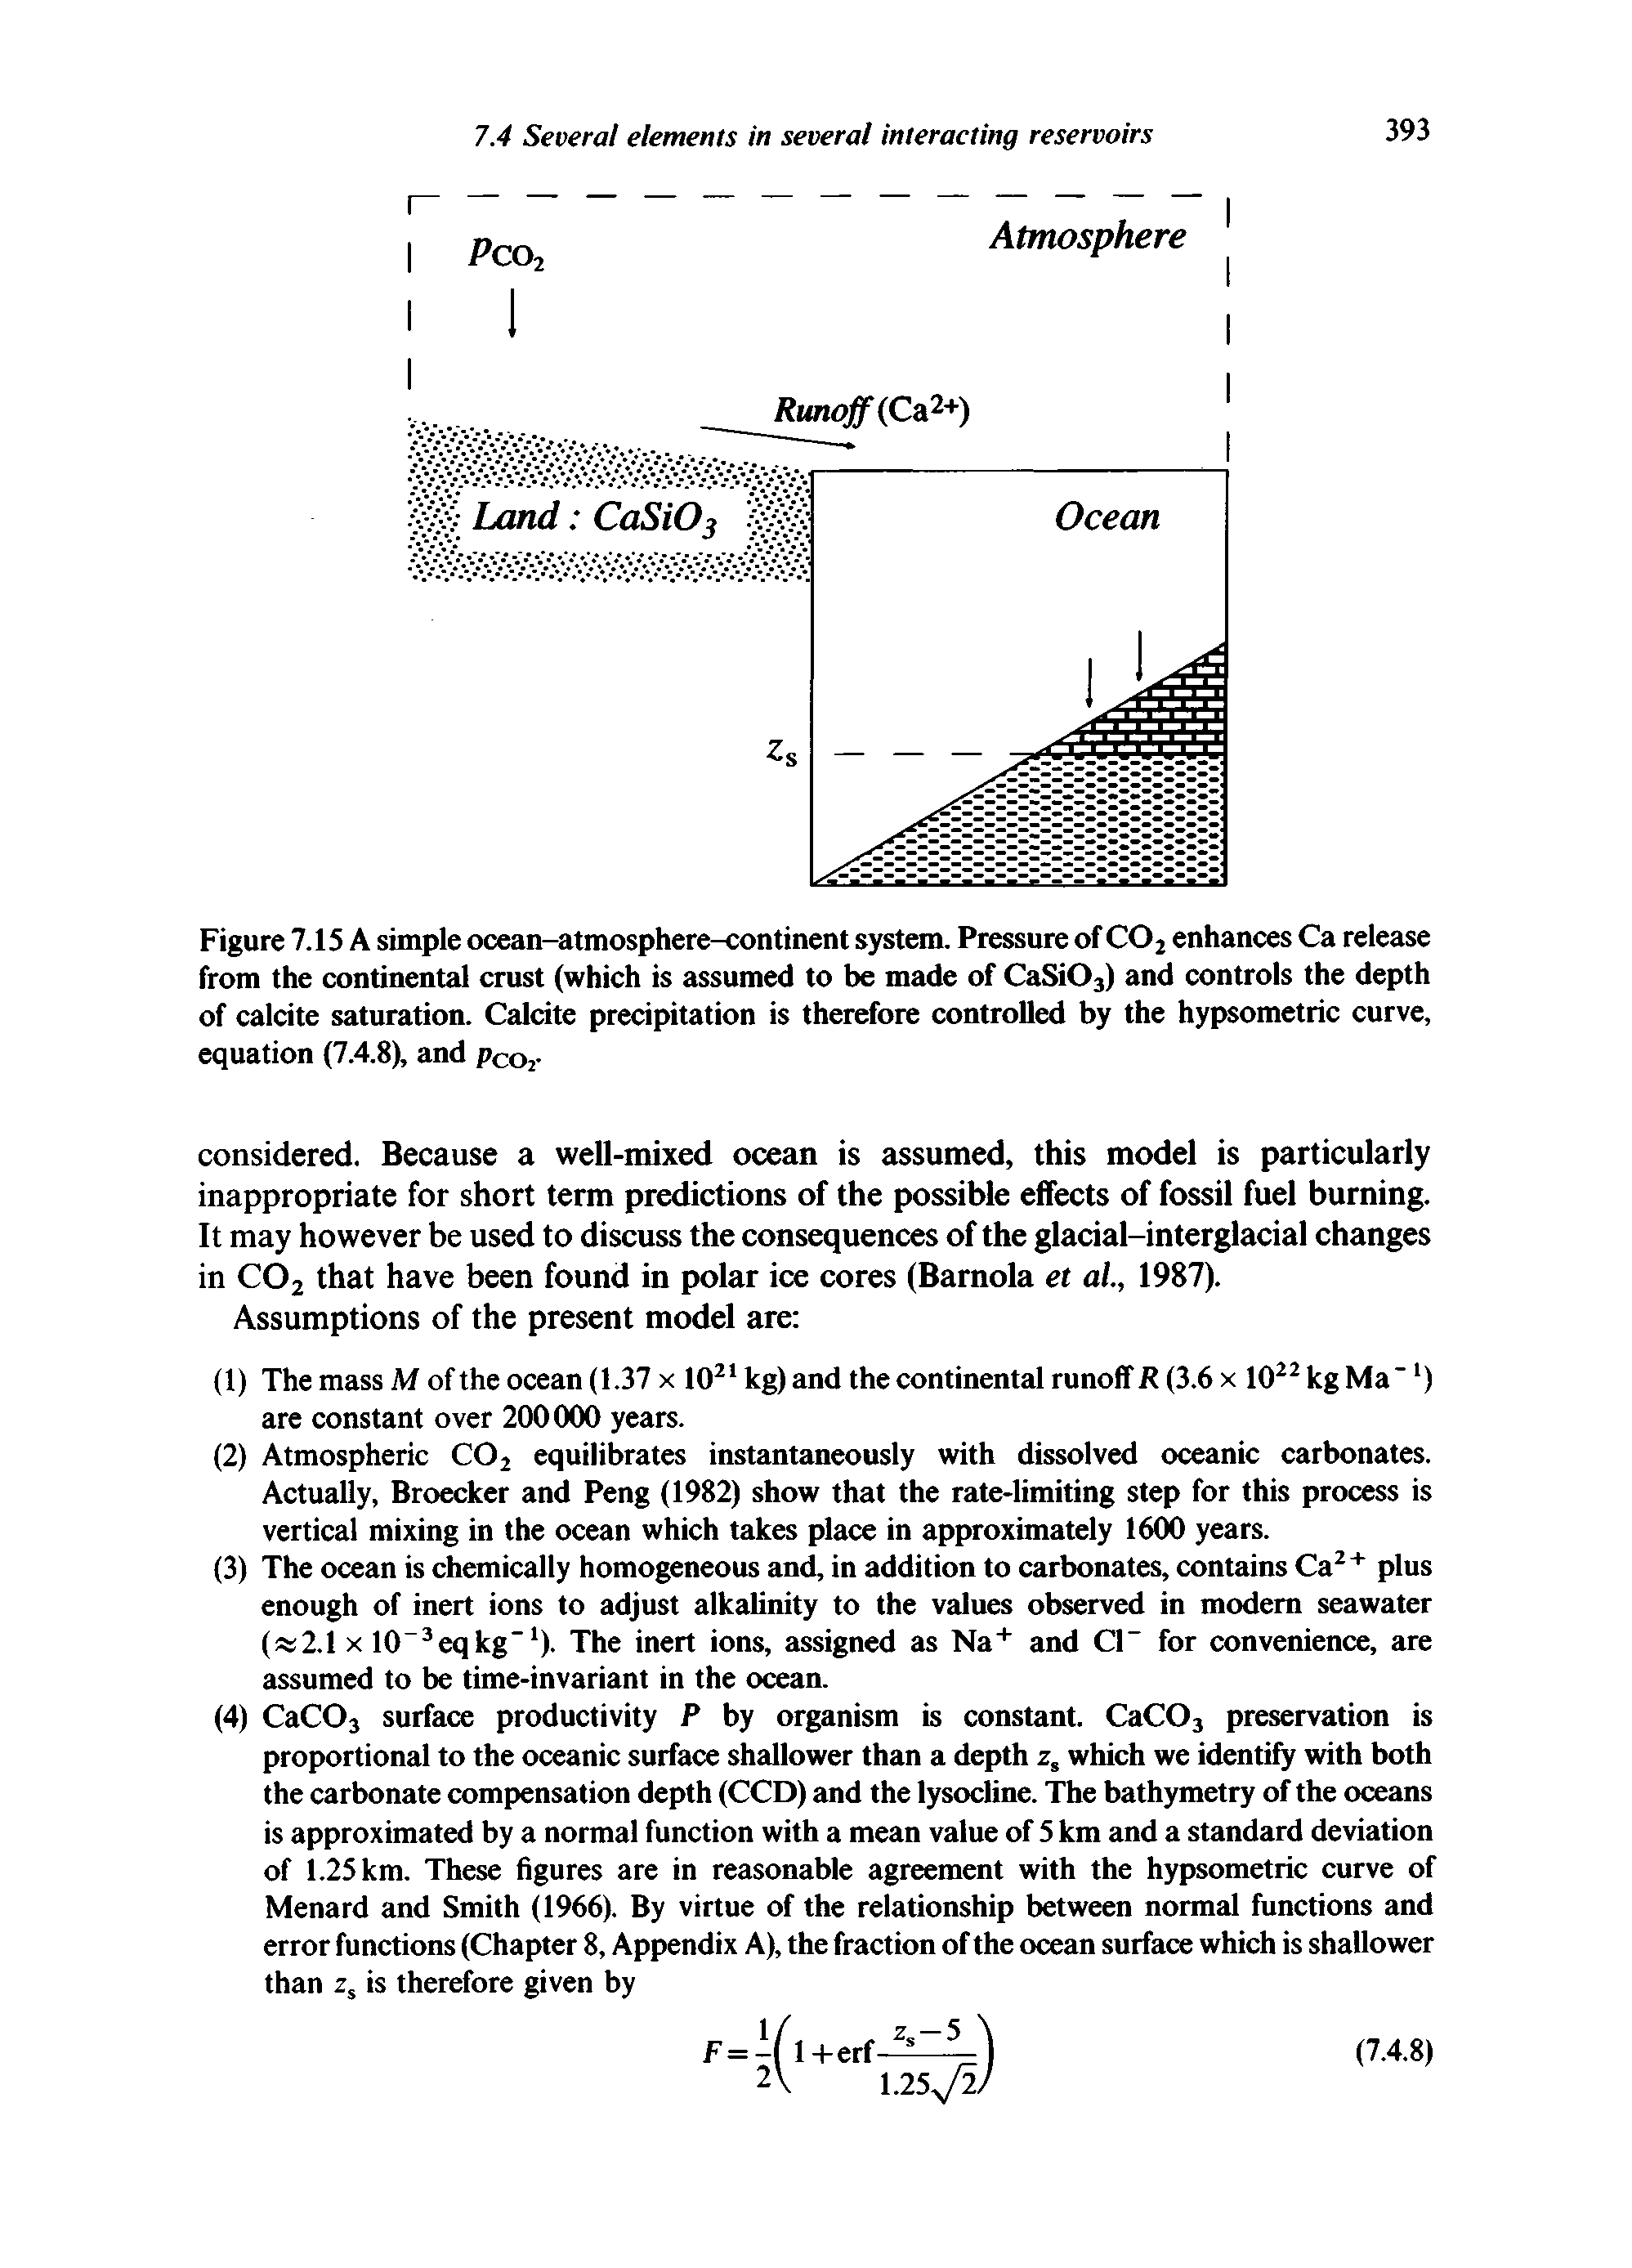 Figure 7.15 A simple ocean-atmosphere-continent system. Pressure of C02 enhances Ca release from the continental crust (which is assumed to be made of CaSi03) and controls the depth of calcite saturation. Calcite precipitation is therefore controlled by the hypsometric curve, equation (7.4.8), and Pco2-...